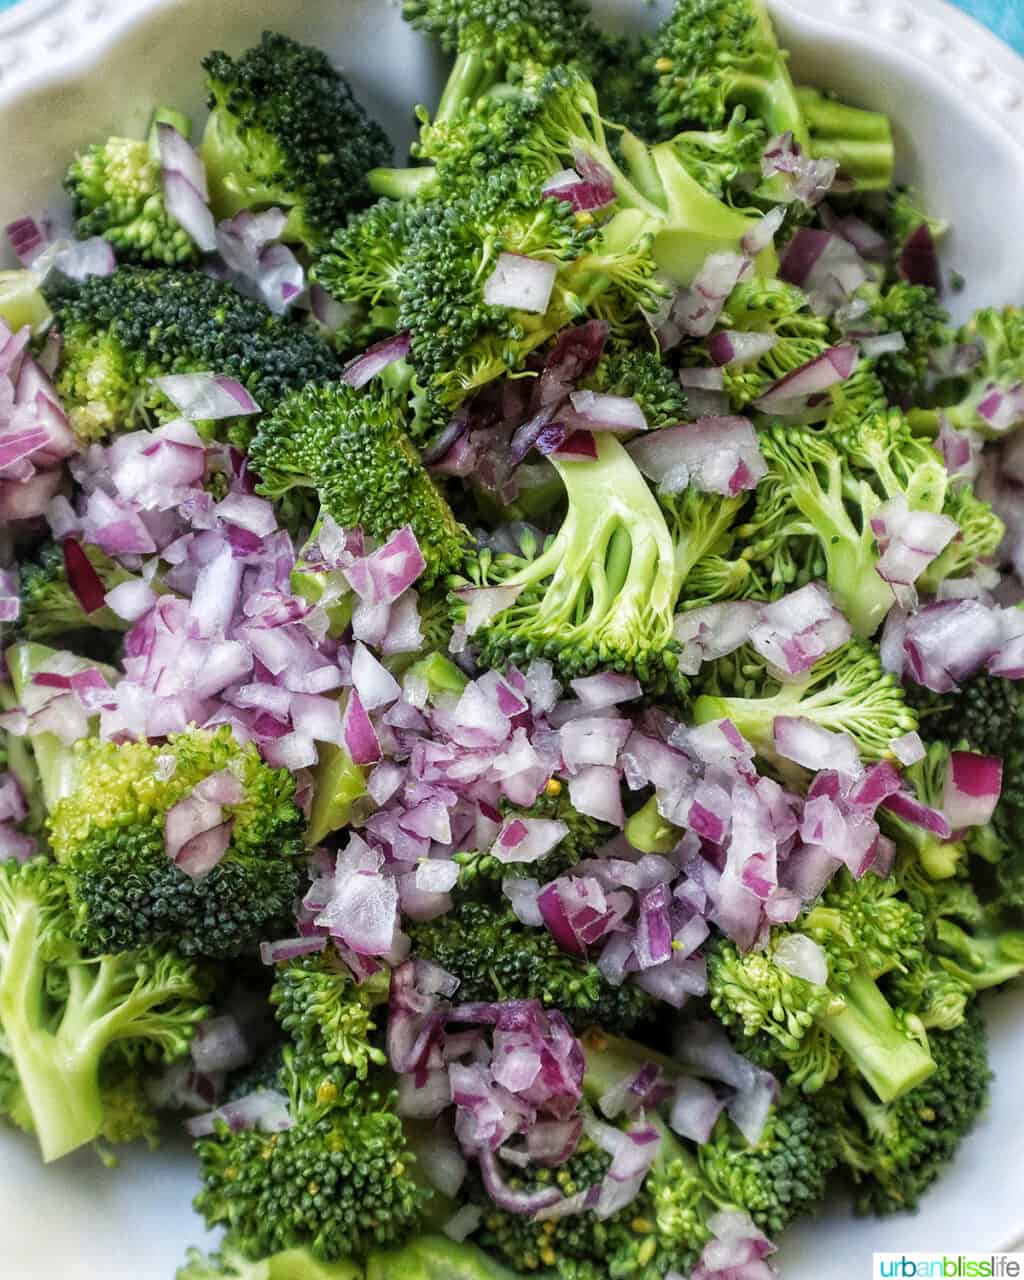 red onions on top of broccoli.